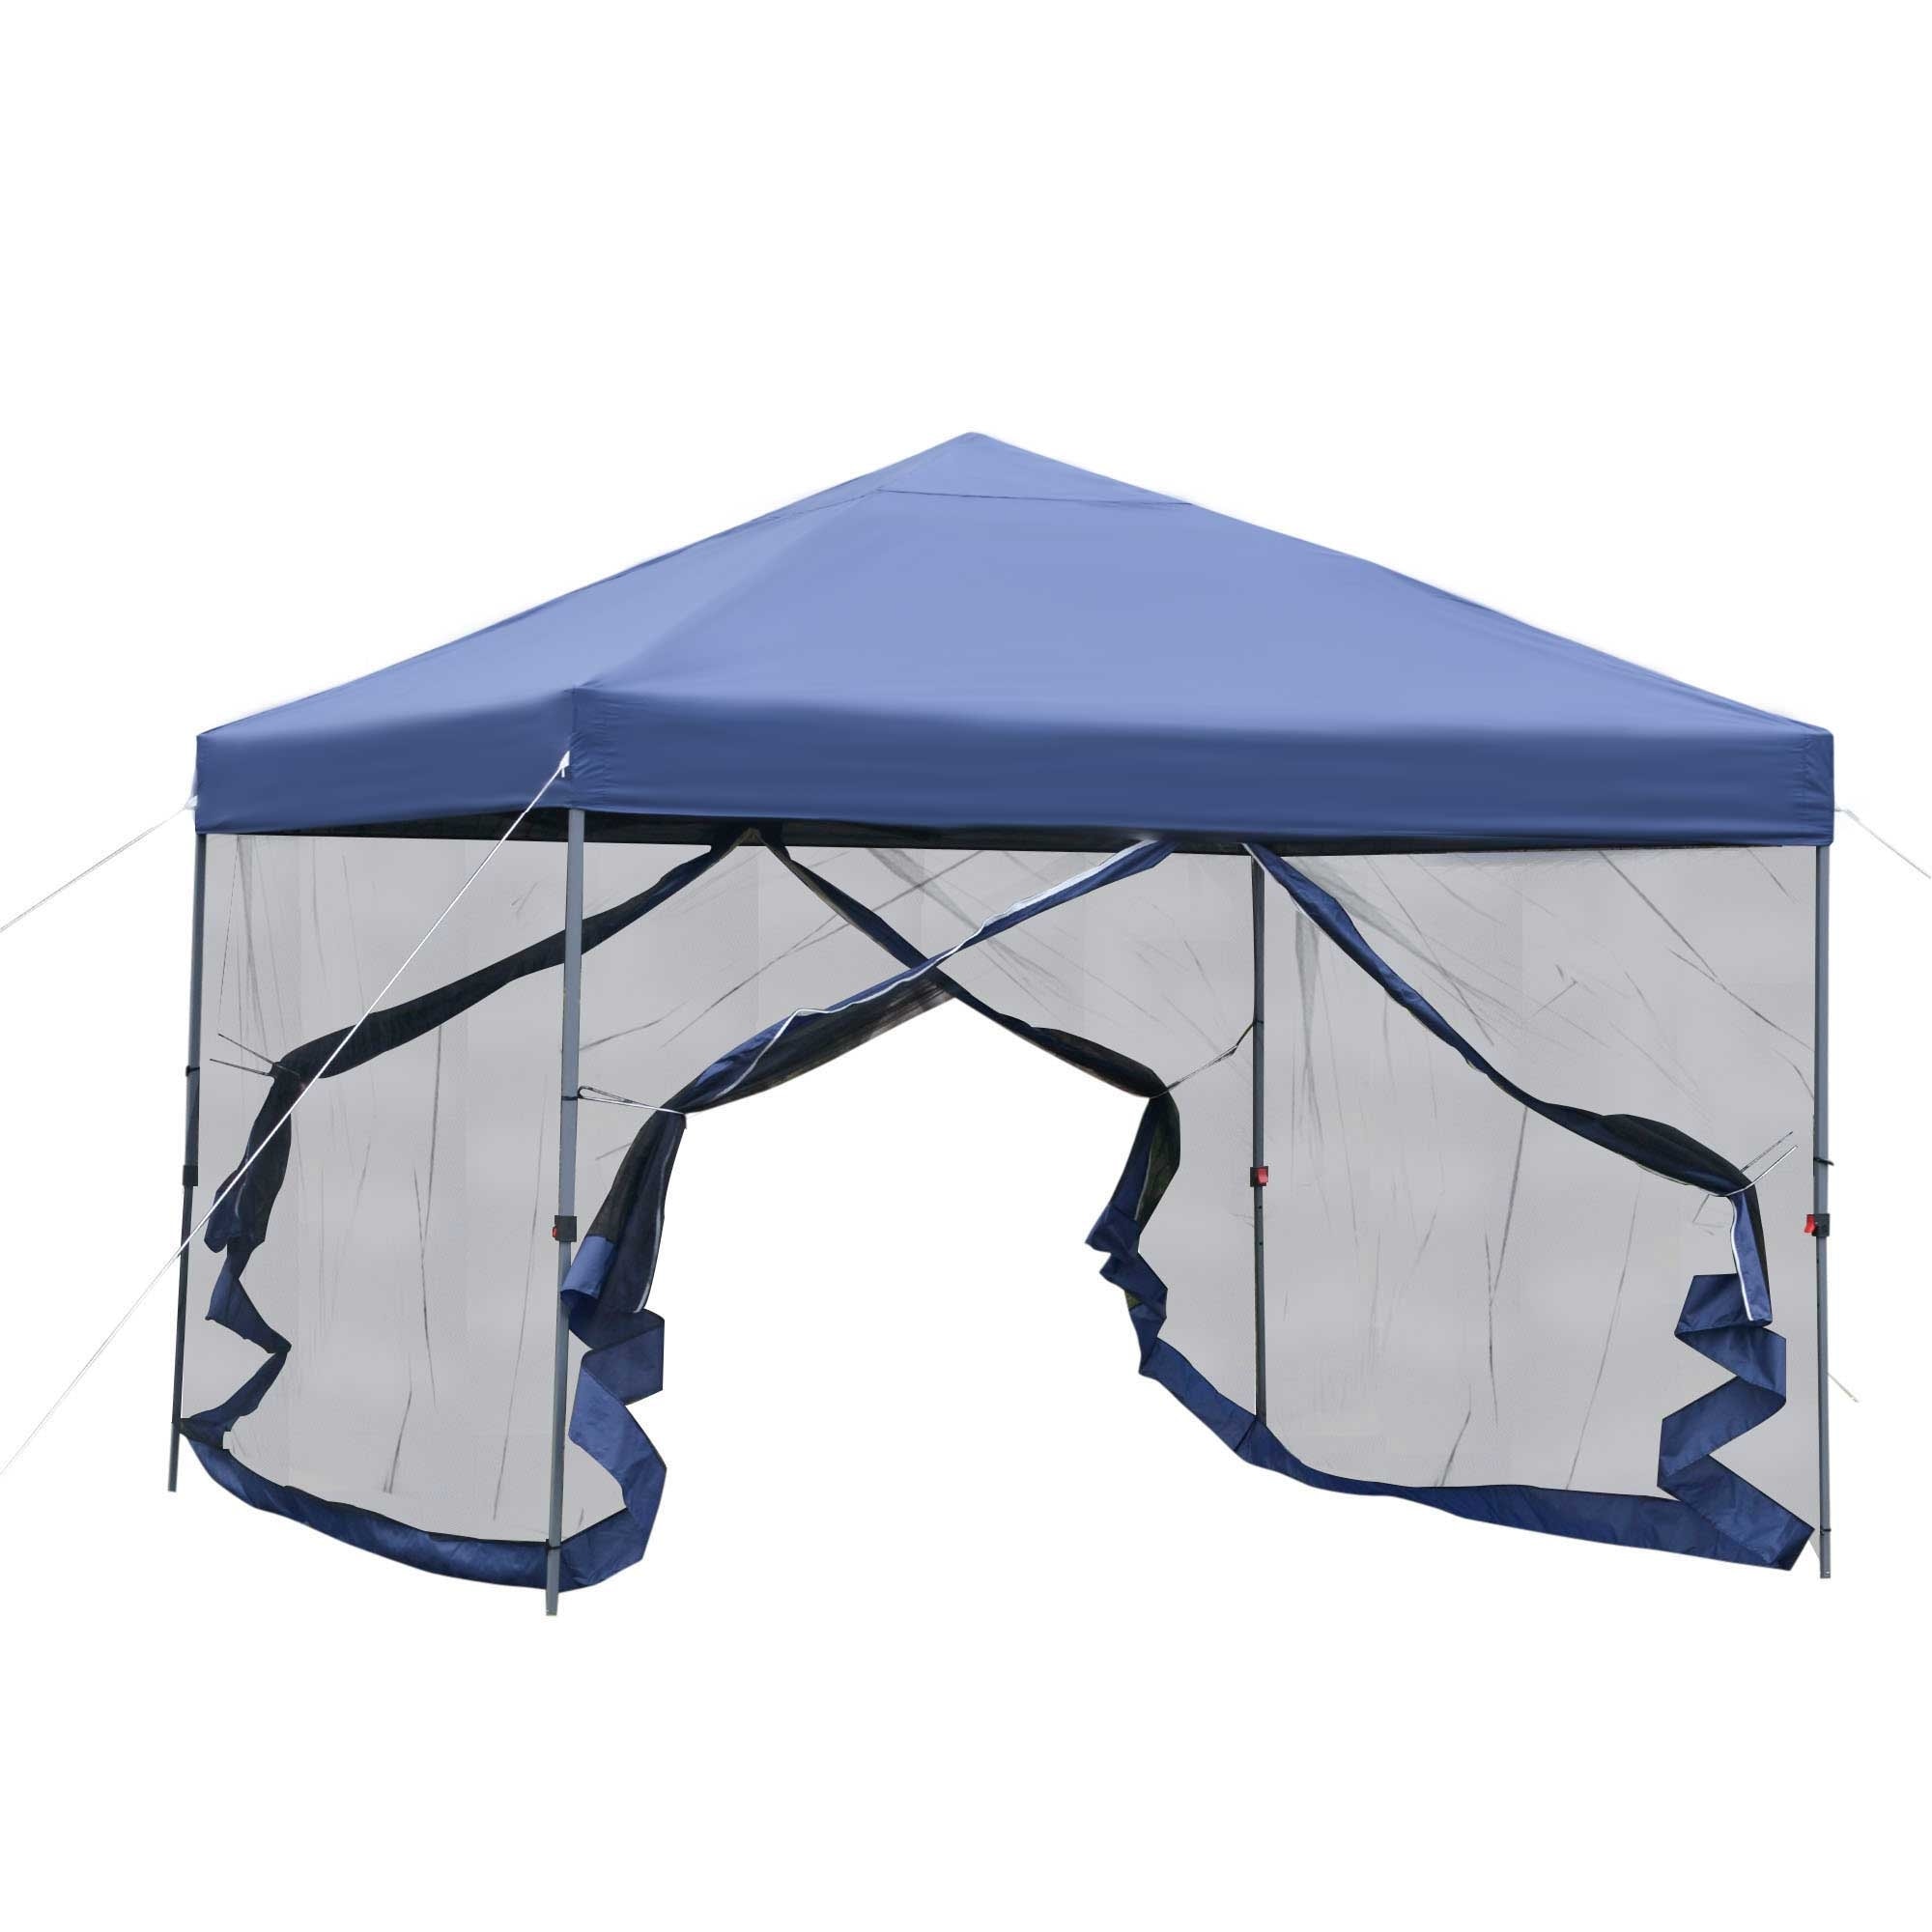 Outsunny 10' X 10' Pop Up Canopy, Foldable Canopy Tent With